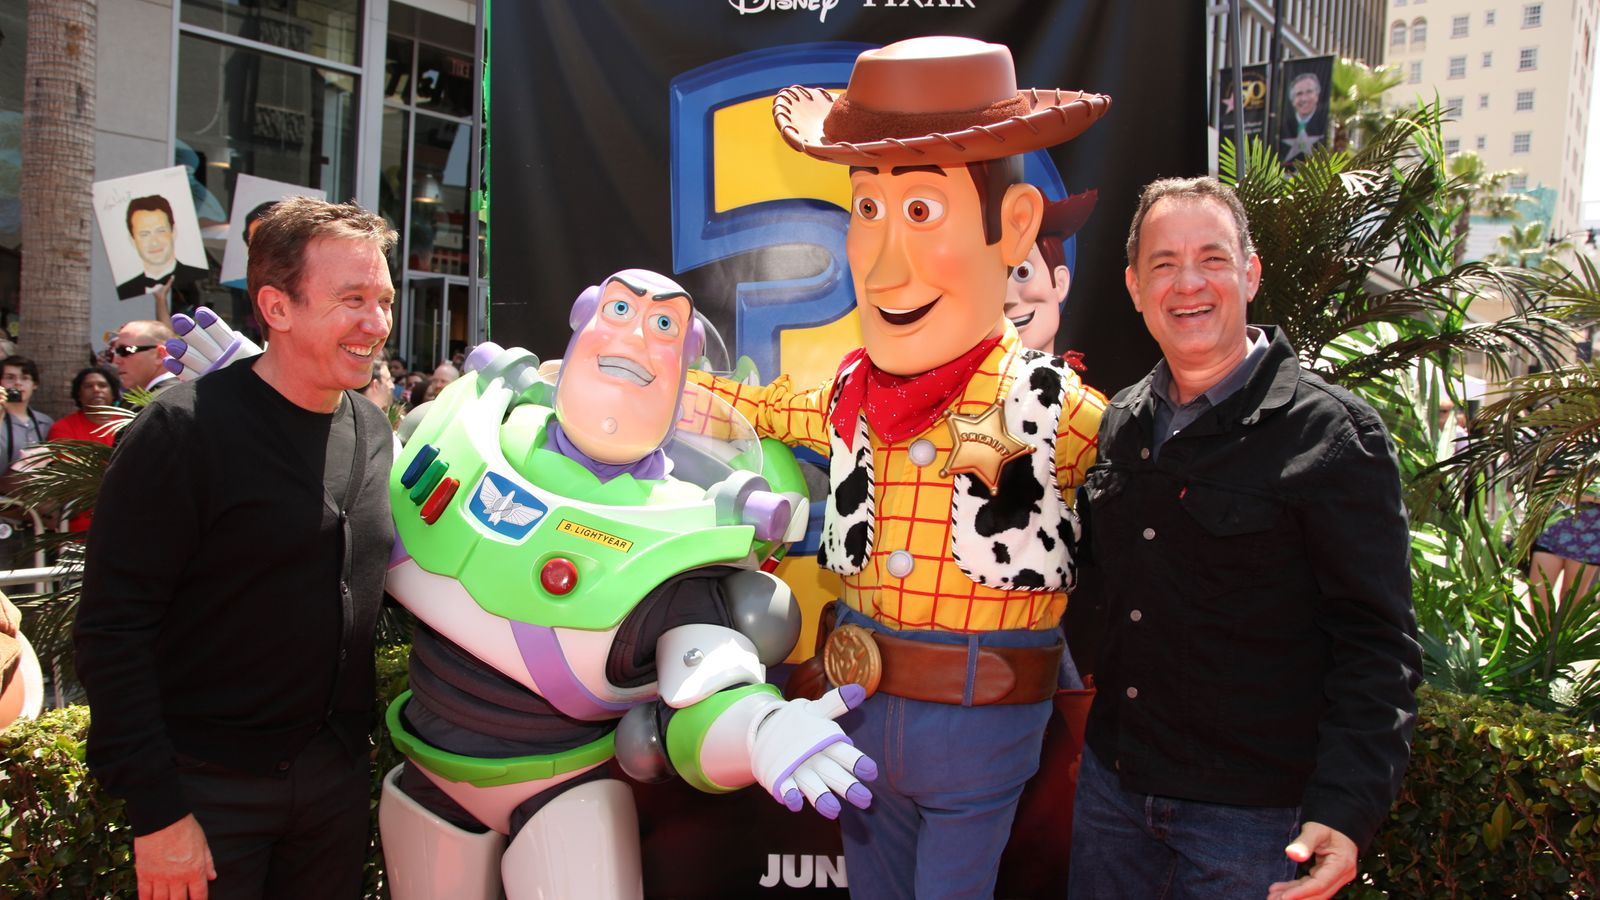 Toy Story 5: Confirmation, Returning Characters & Everything We Know